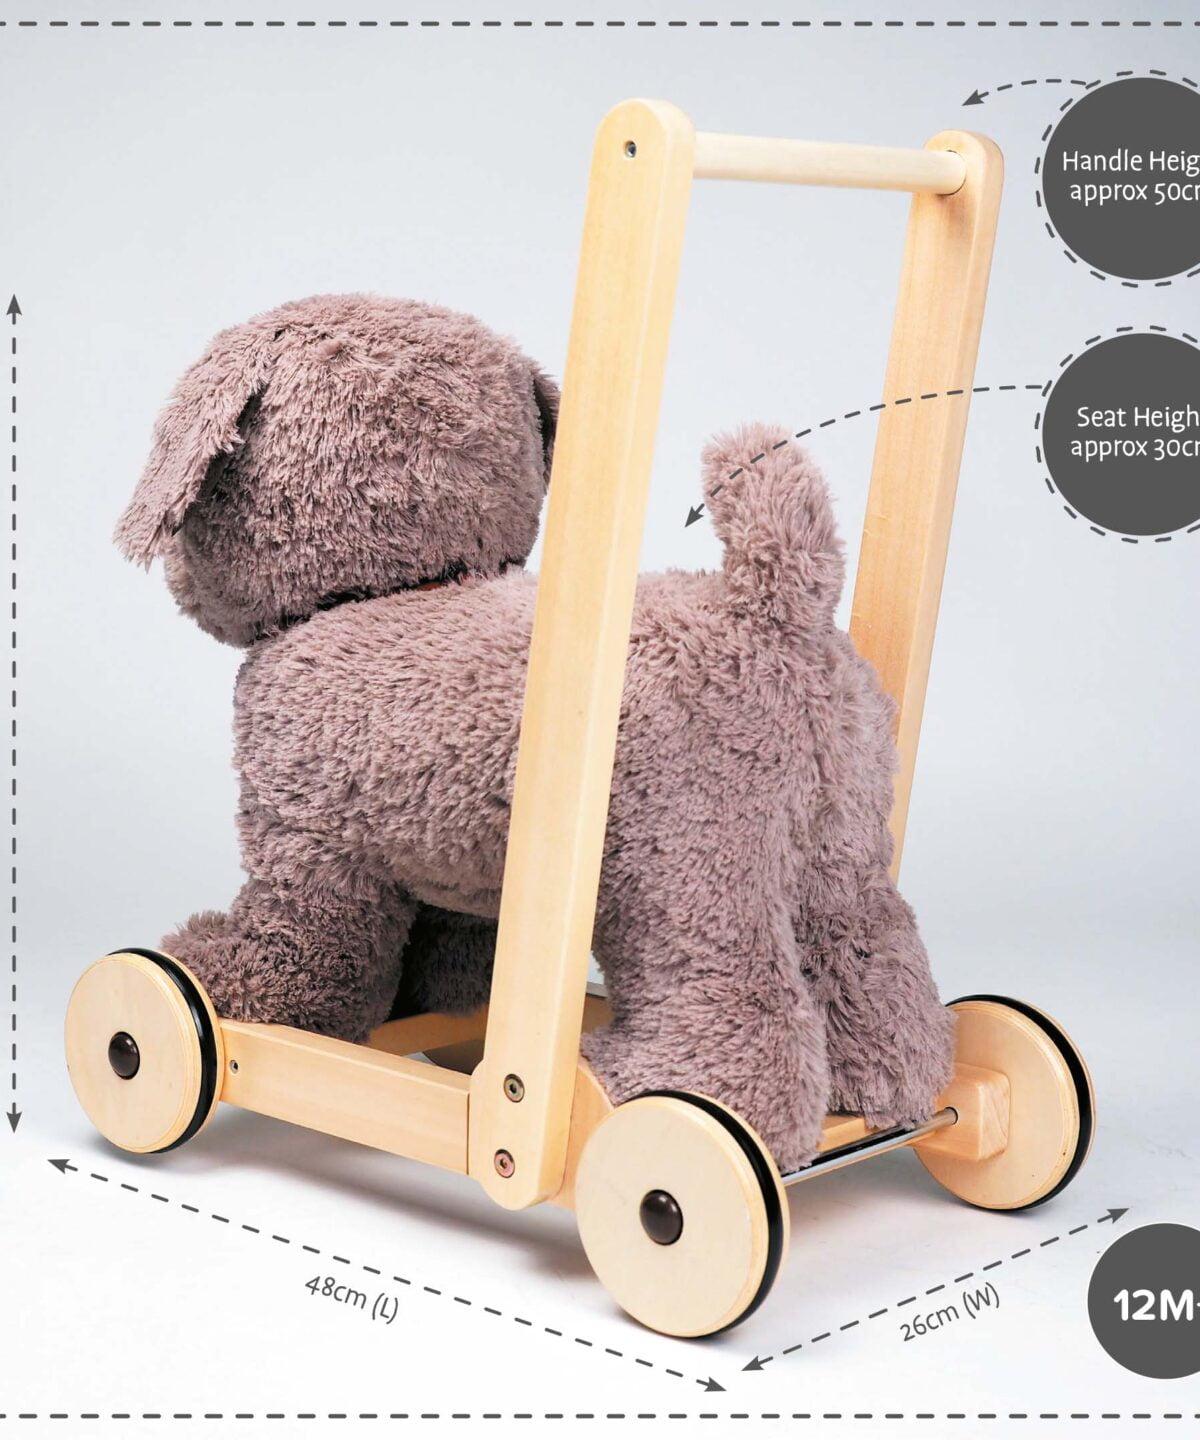 Product dimensions displayed for Bailey Dog Baby Walker